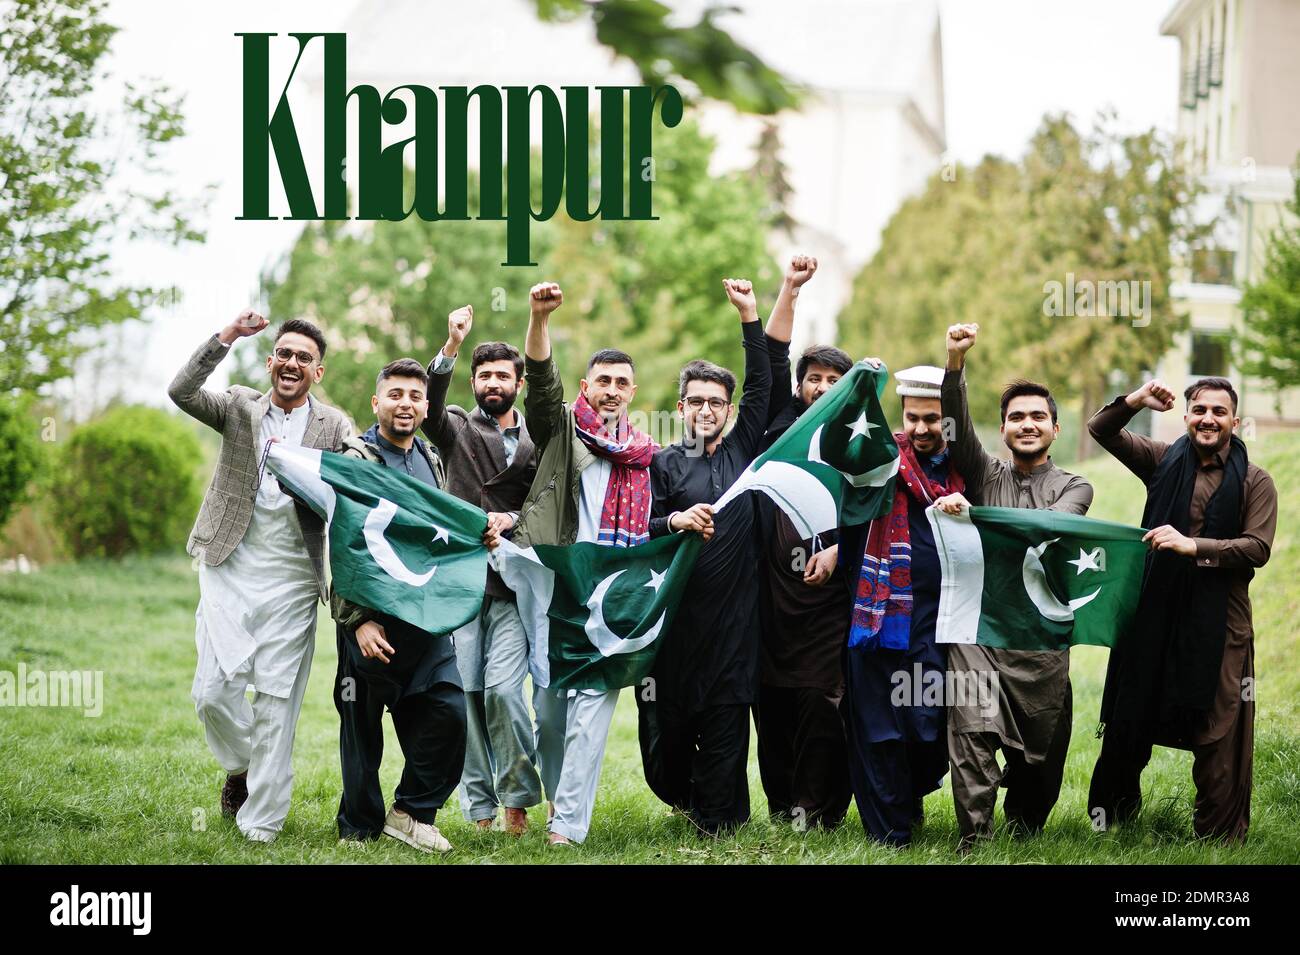 Khanpur city. Group of pakistani man wearing traditional clothes with national flags. Biggest cities of Pakistan concept. Stock Photo